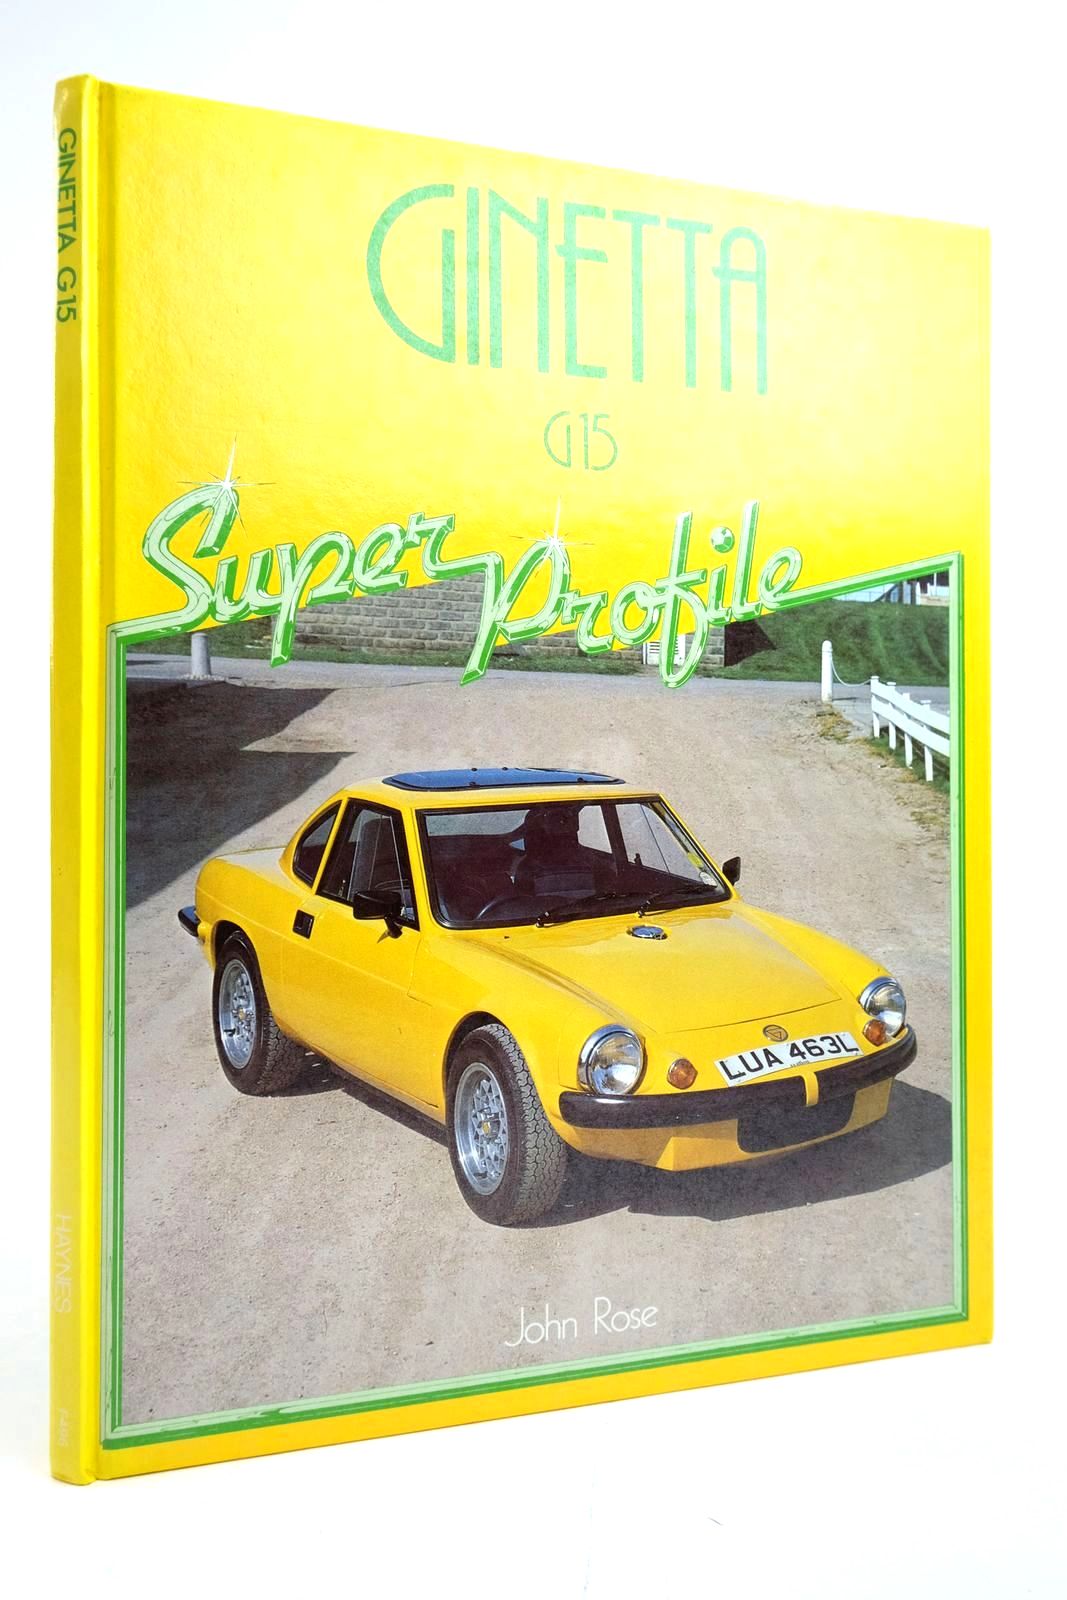 Photo of GINETTA G15 (SUPER PROFILE) written by Rose, John published by Haynes Publishing Group (STOCK CODE: 2135129)  for sale by Stella & Rose's Books